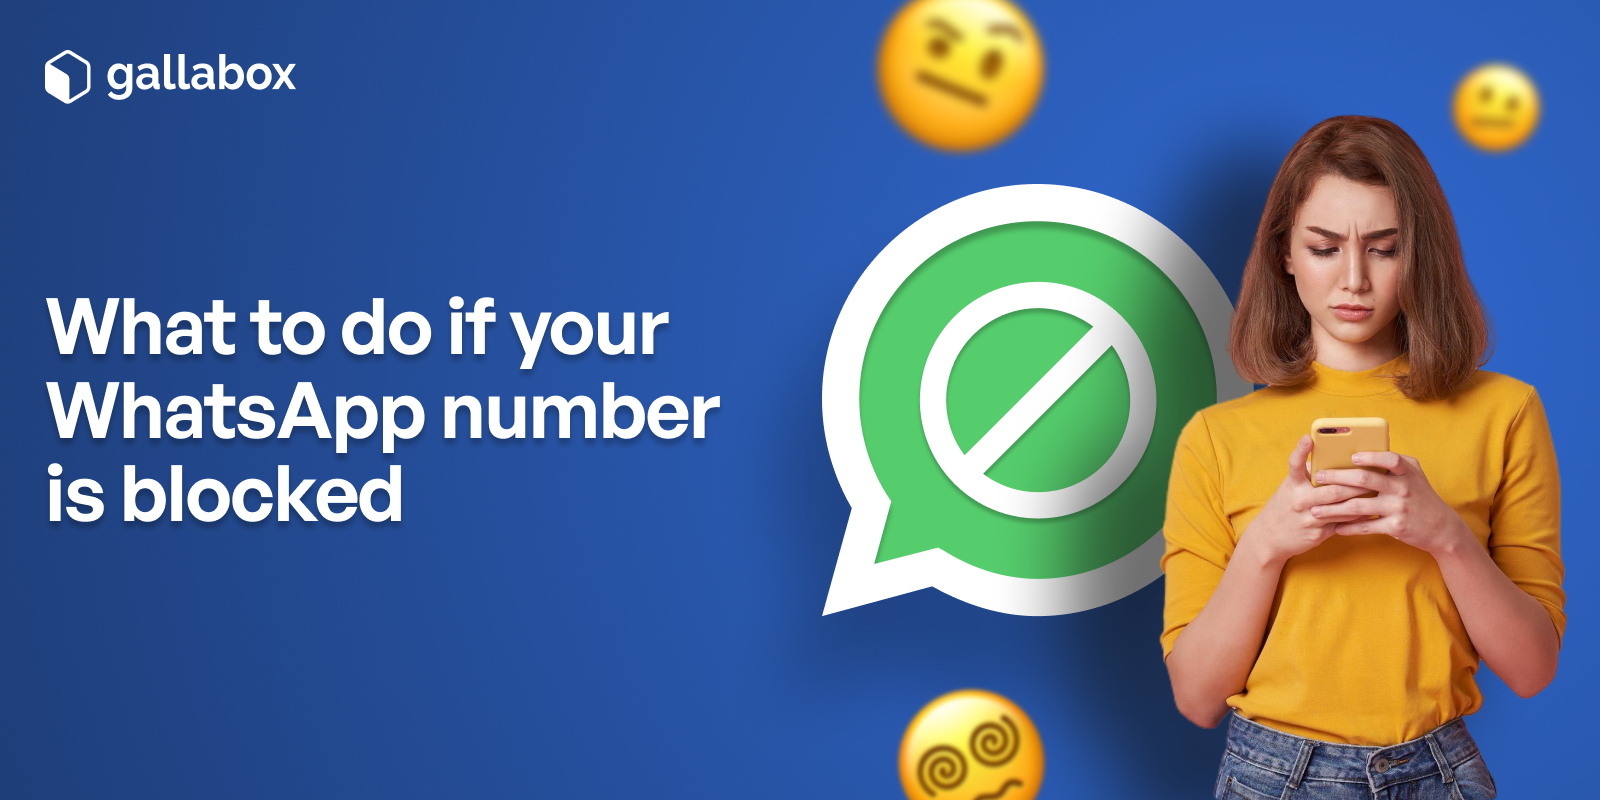 What do you do if your WhatsApp Number is Blocked? Steps, Best Practices and Messaging Templates